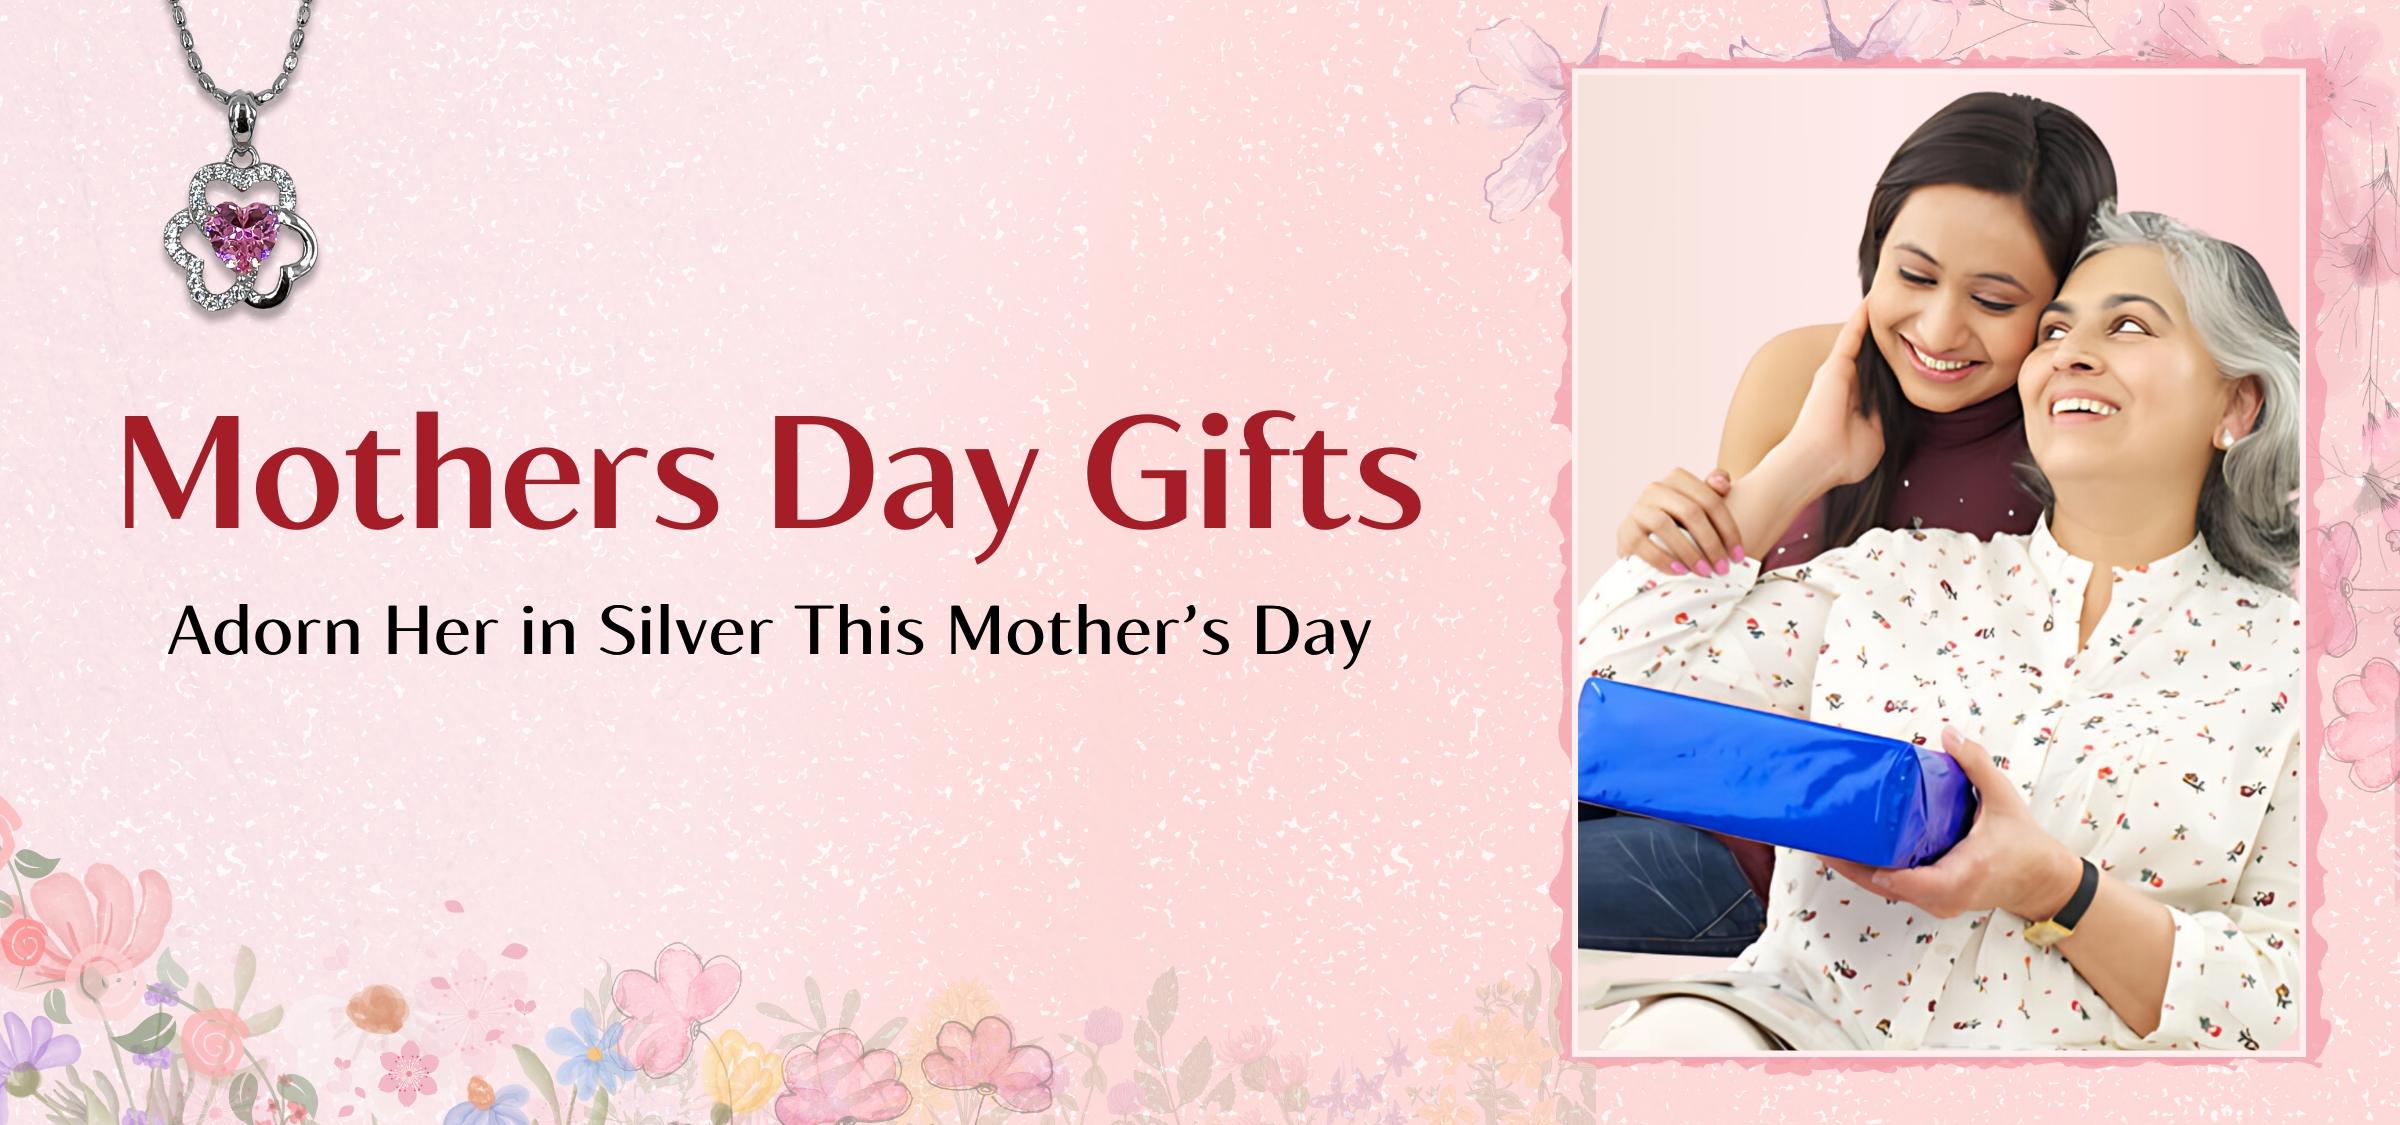 Celebrate Mother's Day with Satlaa Silver Jewelry